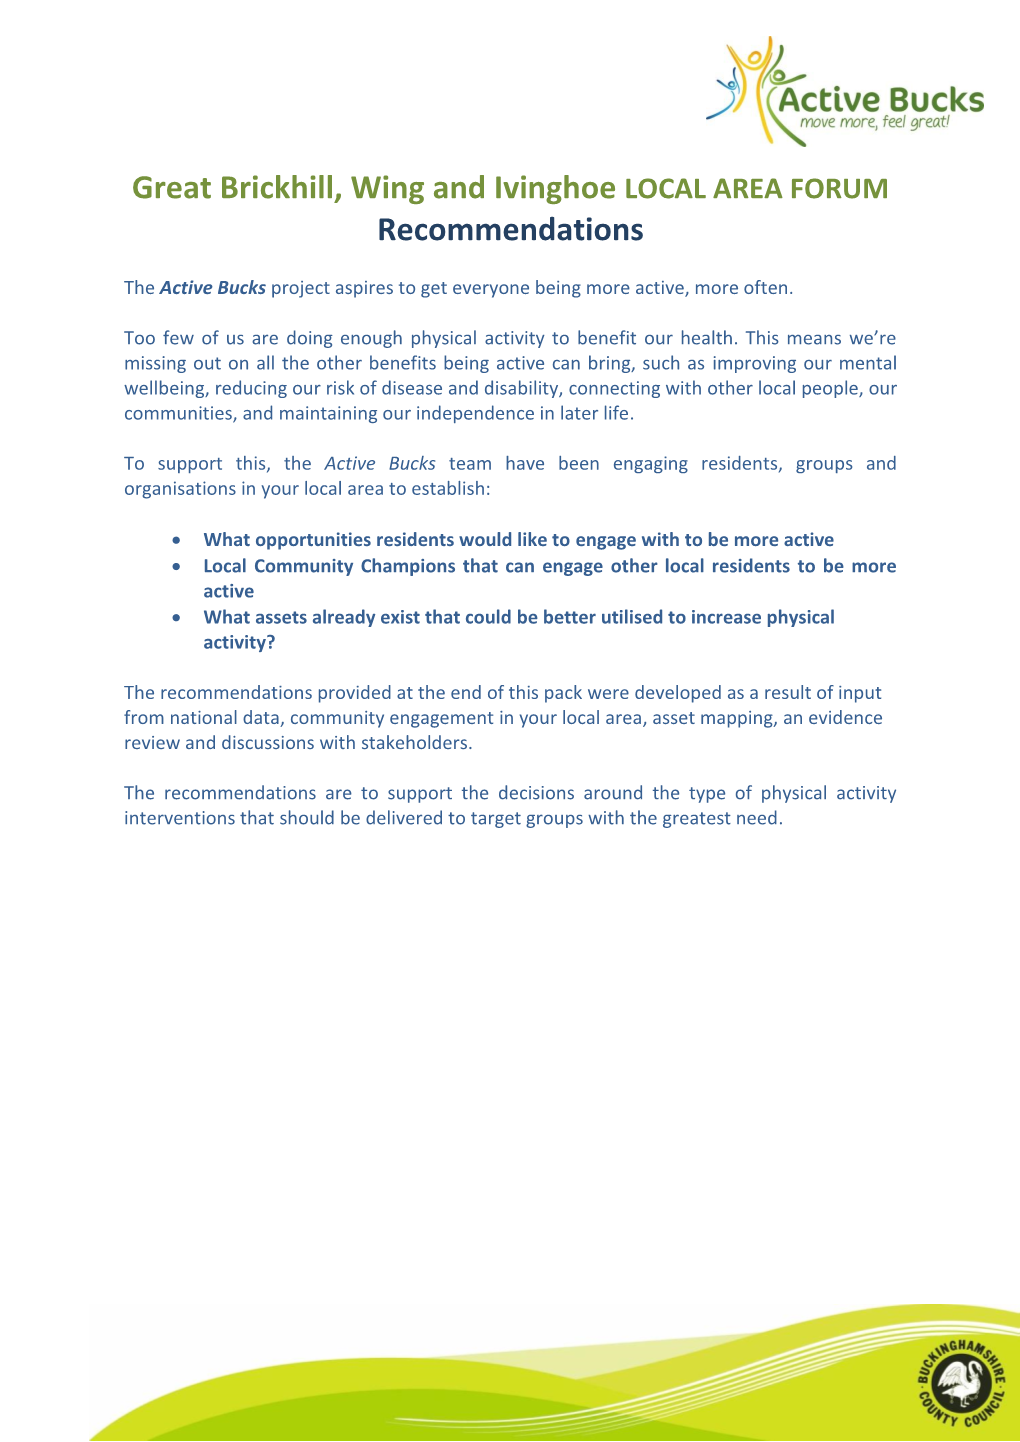 Great Brickhill, Wing and Ivinghoe LOCAL AREA FORUM Recommendations